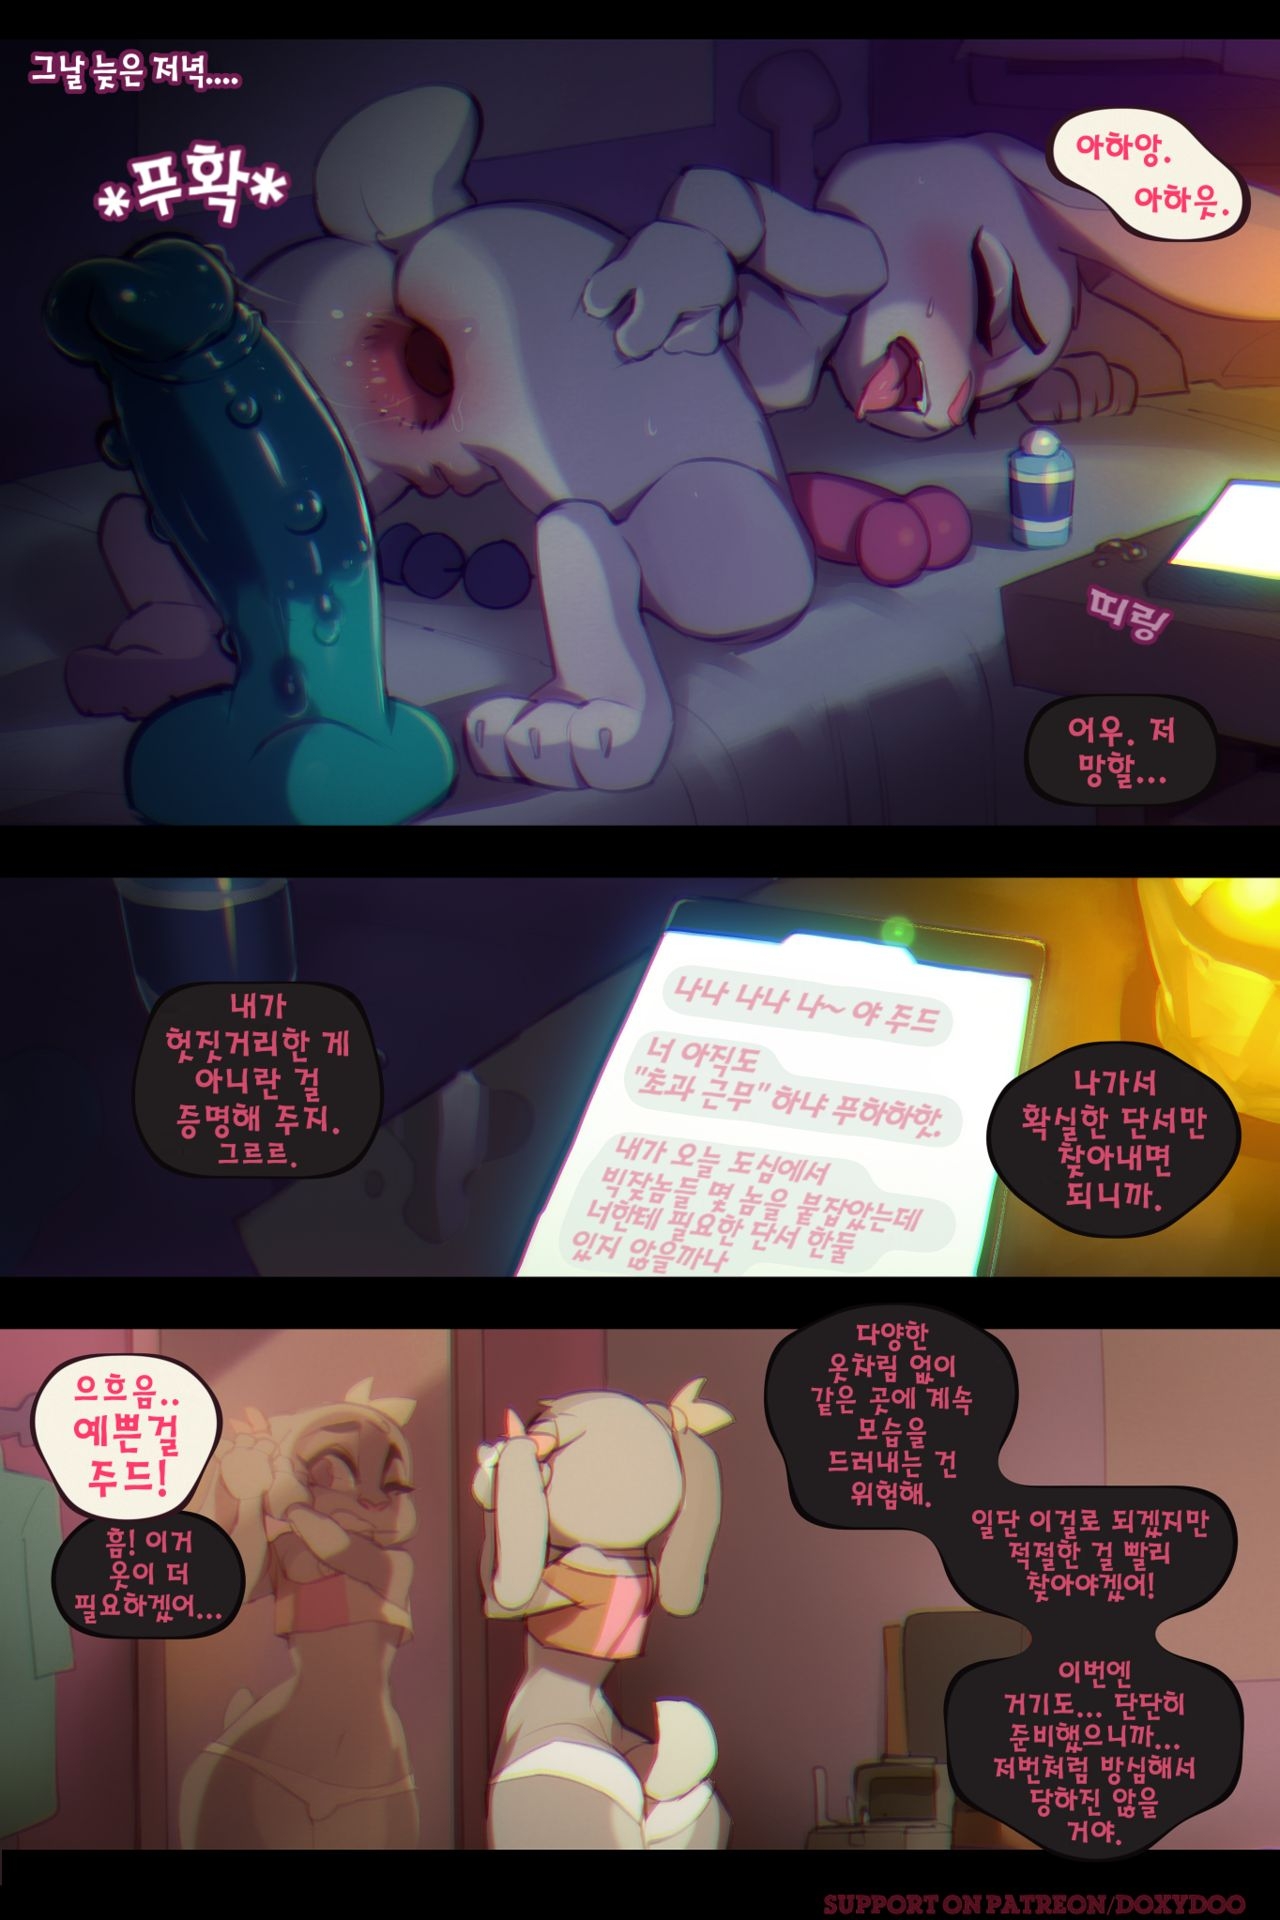 [Doxy] Sweet Sting Part 2: Down The Rabbit Hole | 달콤한 함정수사 2부: 토끼 굴속으로 (Zootopia) [Korean] [Ongoing] 5